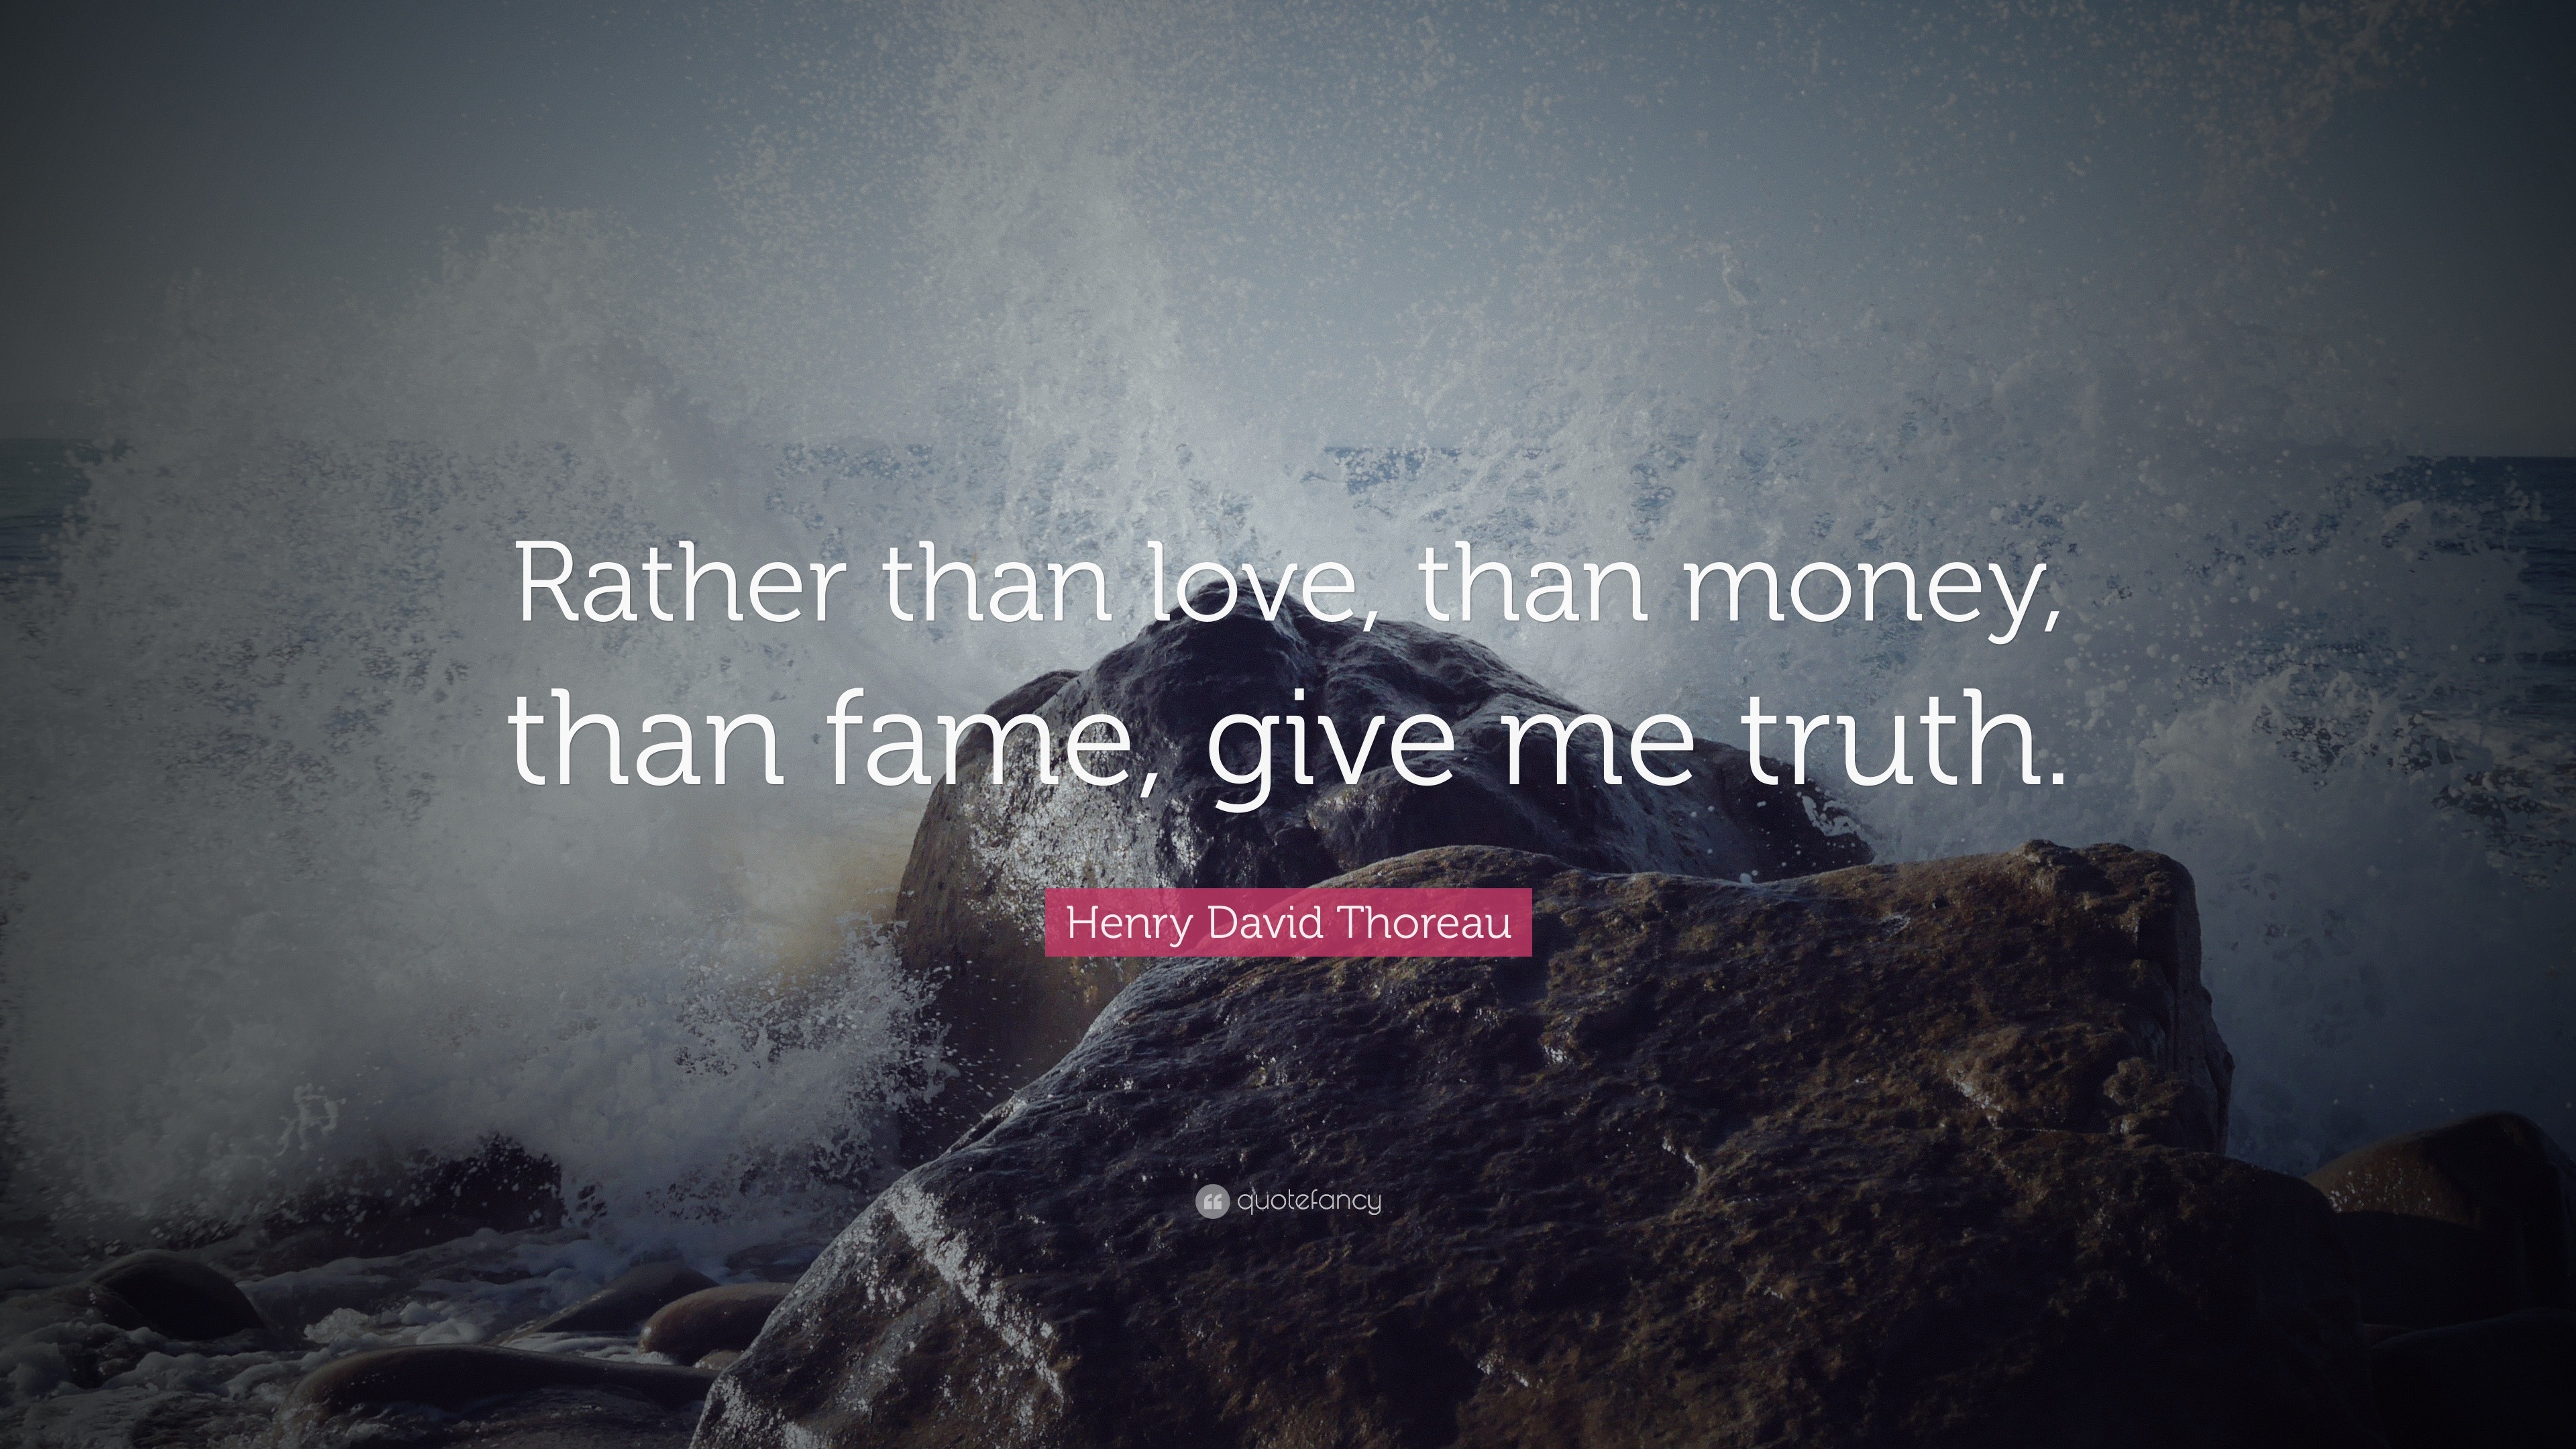 Henry David Thoreau Quote: "Rather than love, than money, than fame, give me truth." (15 ...